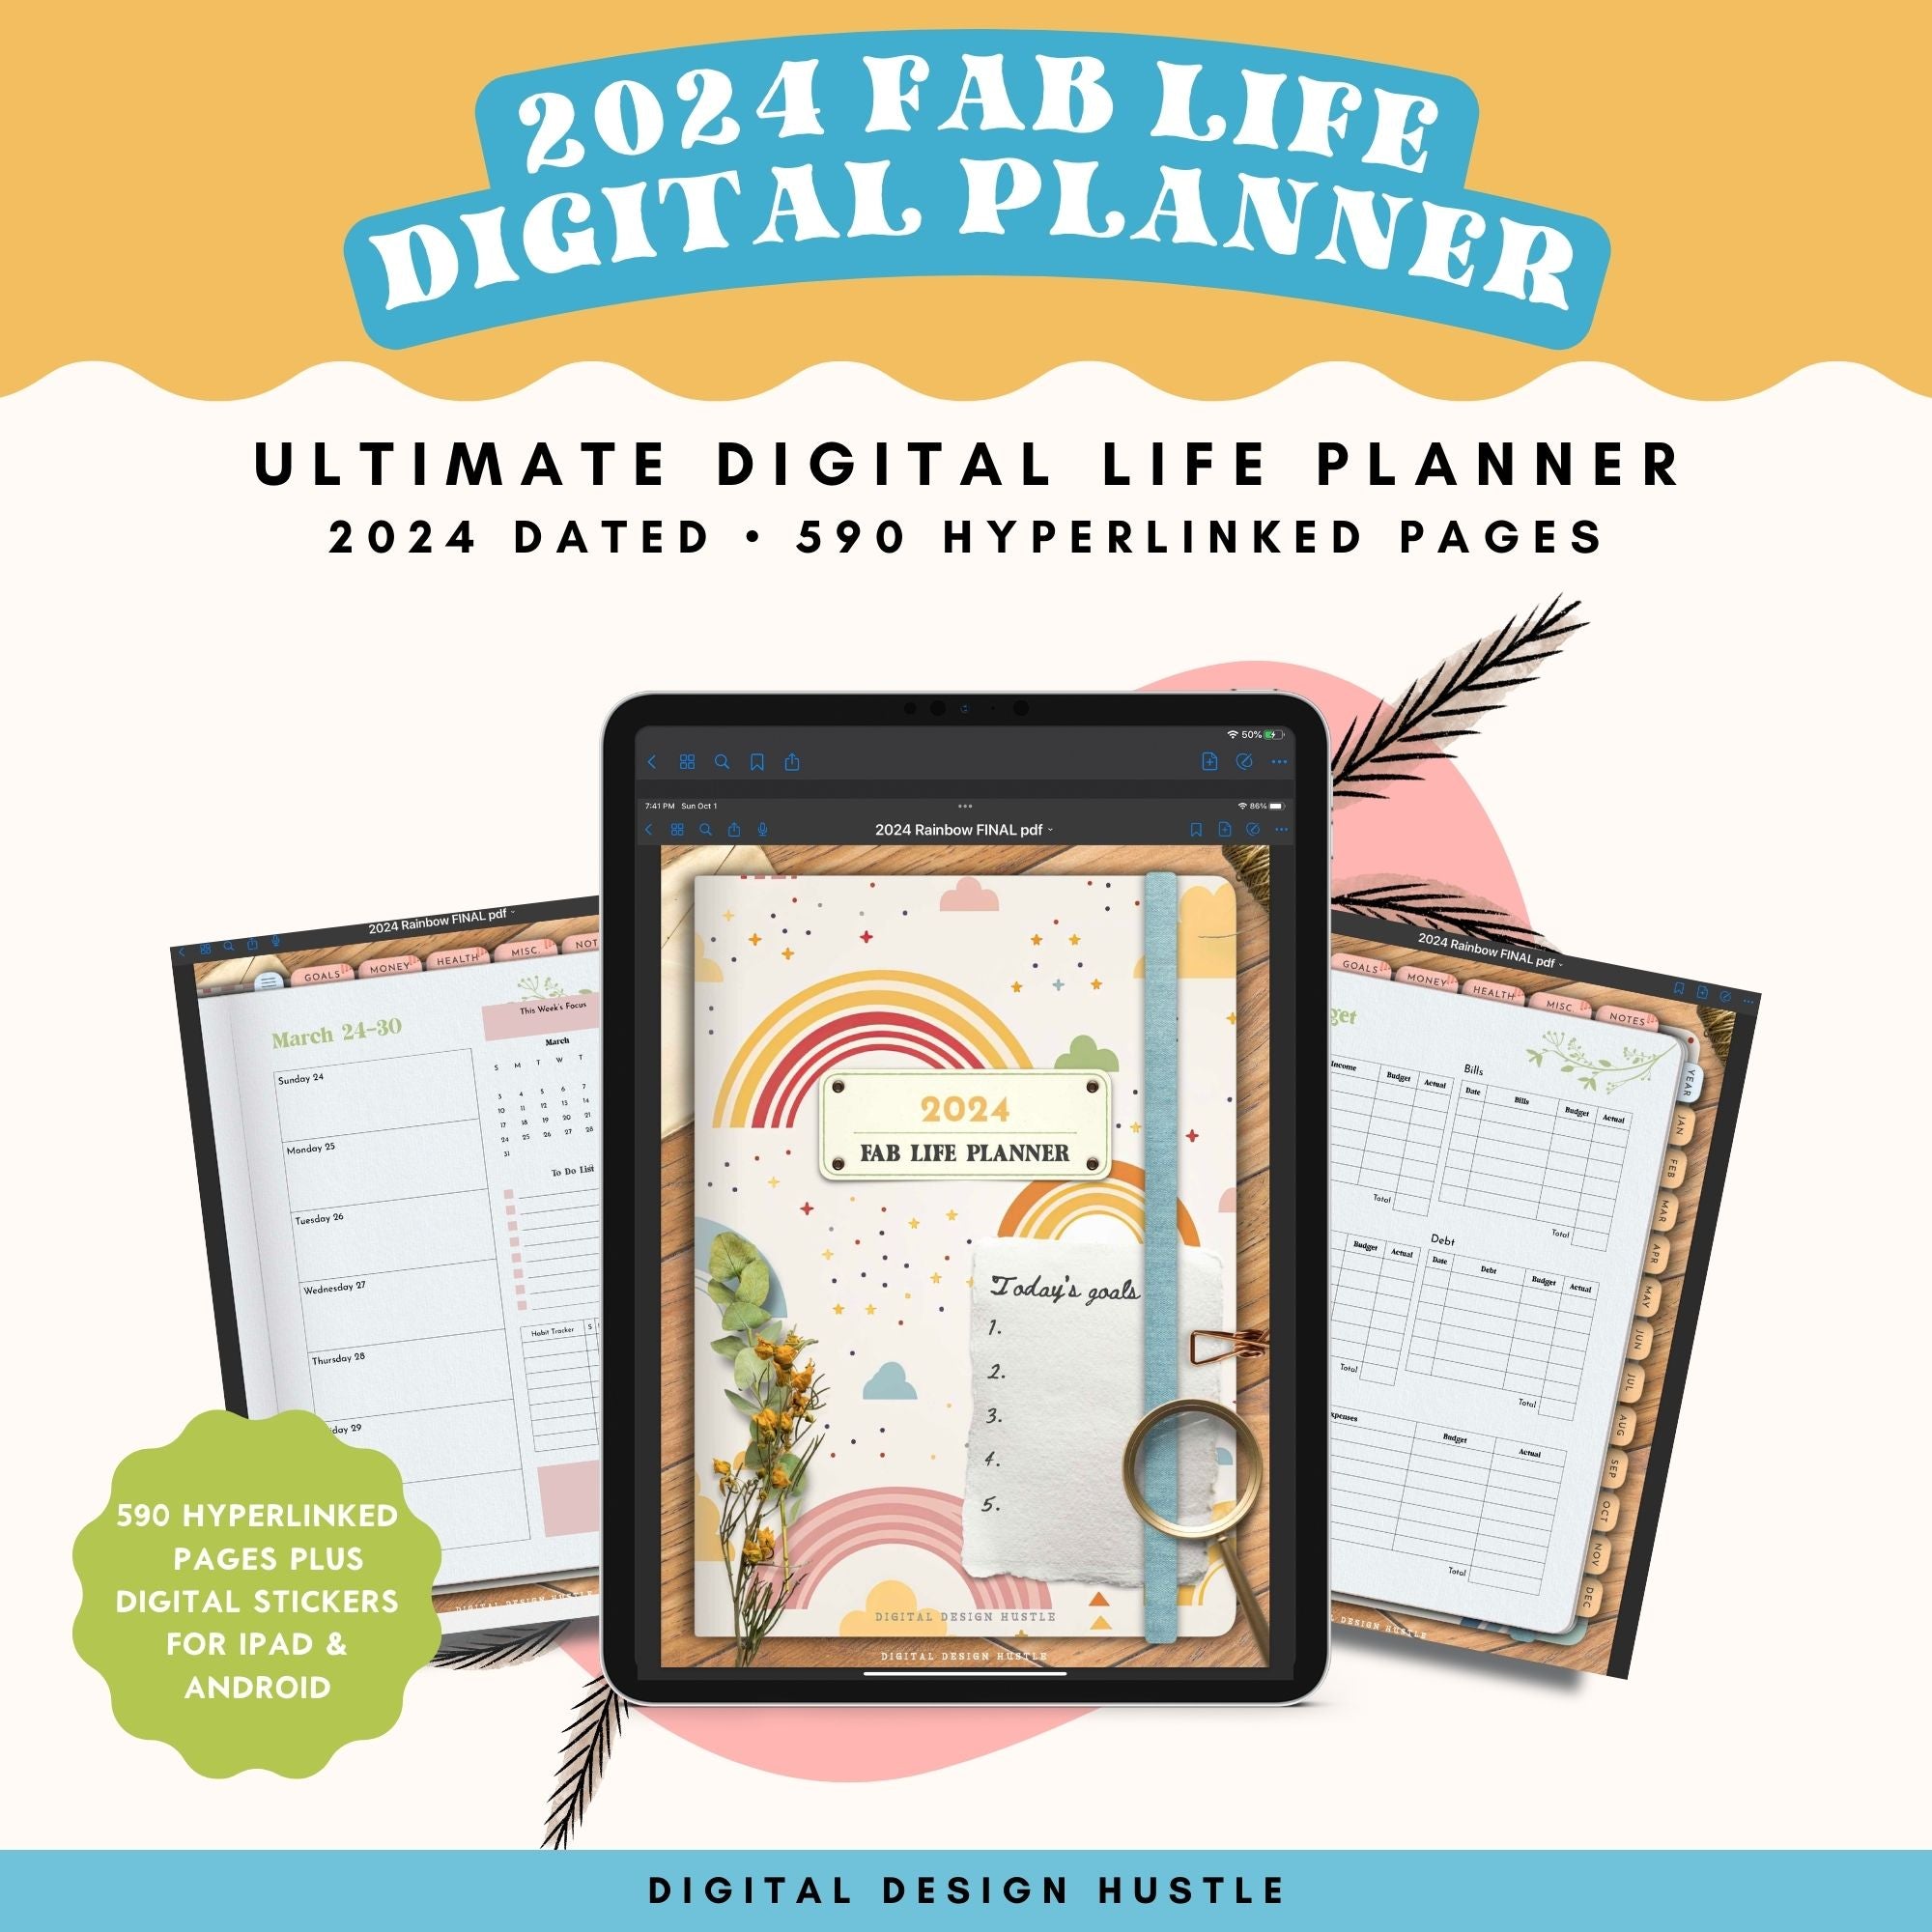 Embrace the future with our meticulously crafted 2024 Digital Planner, designed exclusively for GoodNotes. This comprehensive 589-page colorful rainbow planner is your indispensable companion for the year ahead, featuring a thoughtfully structured 365-day planner complete with yearly, weekly, and daily planning pages.